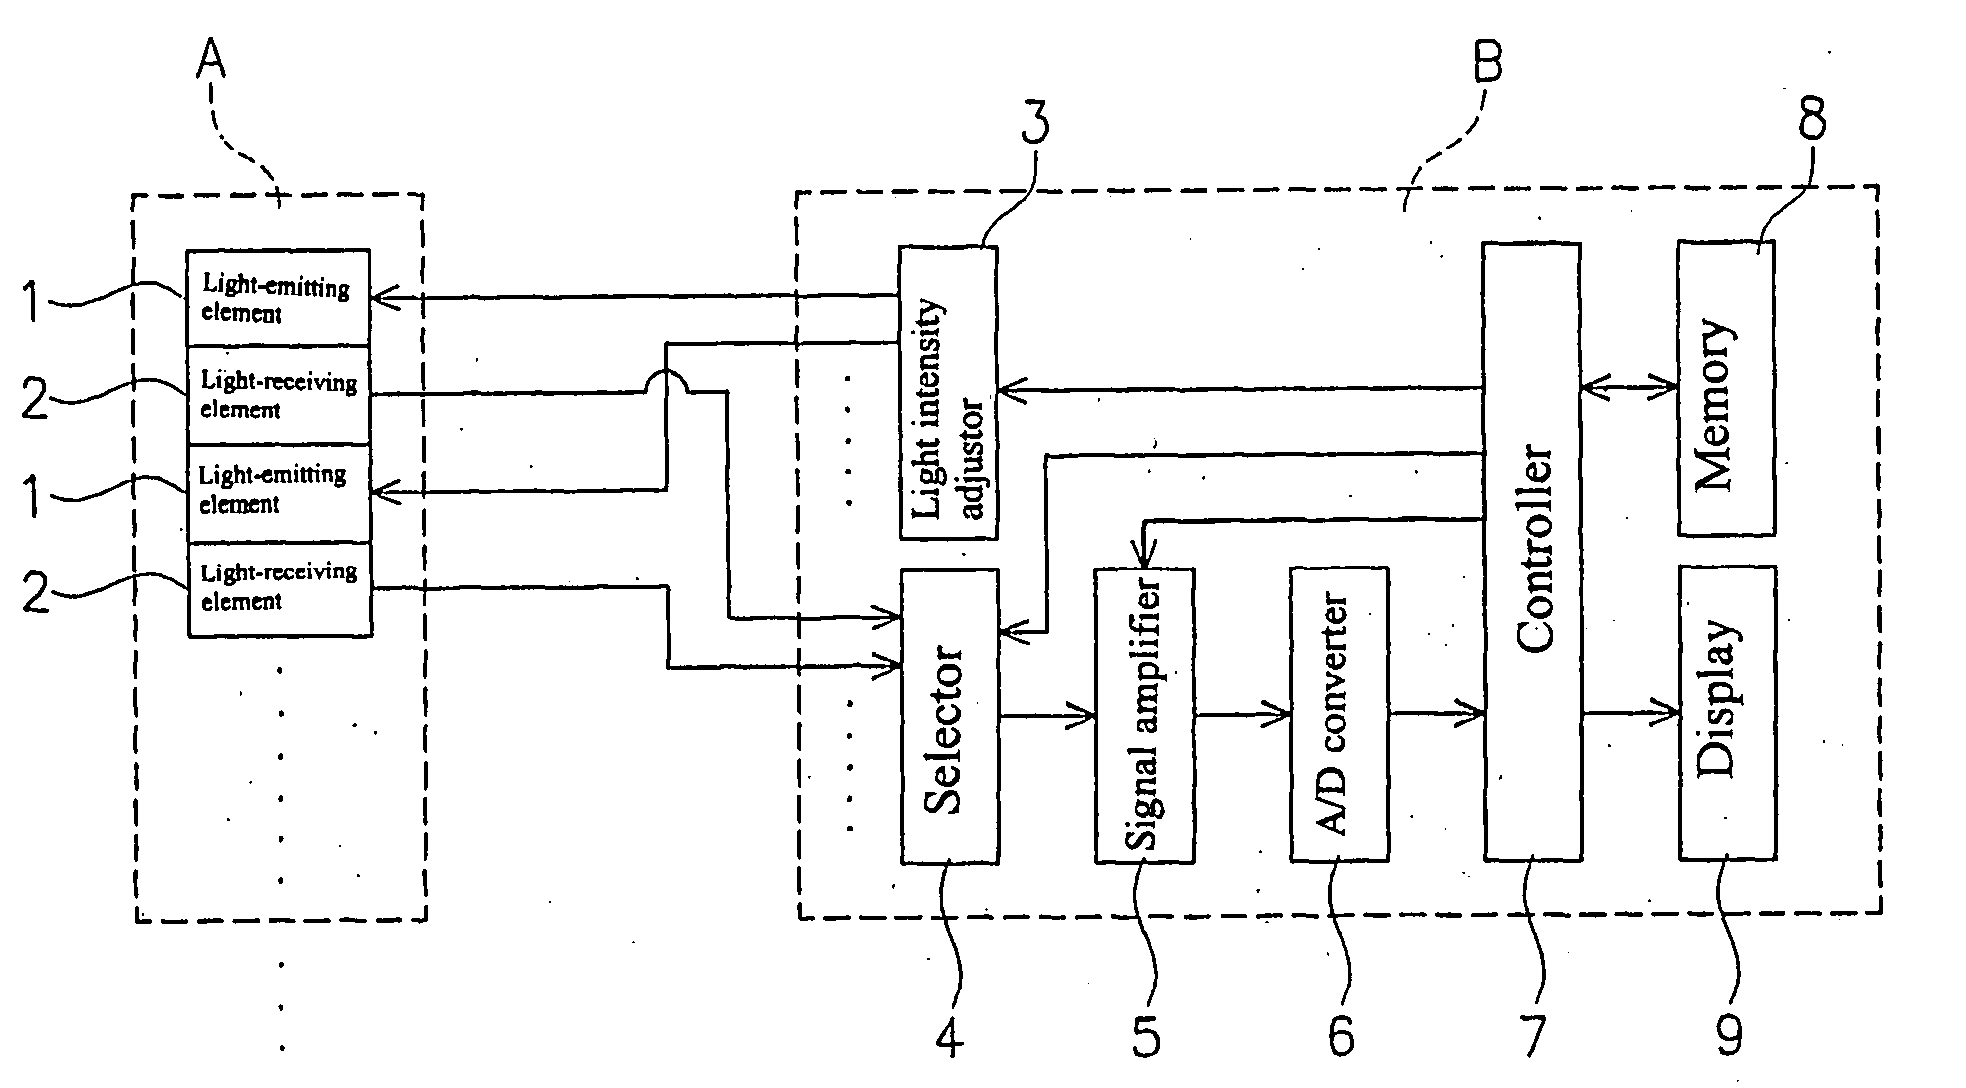 Apparatus for evaluating biological function